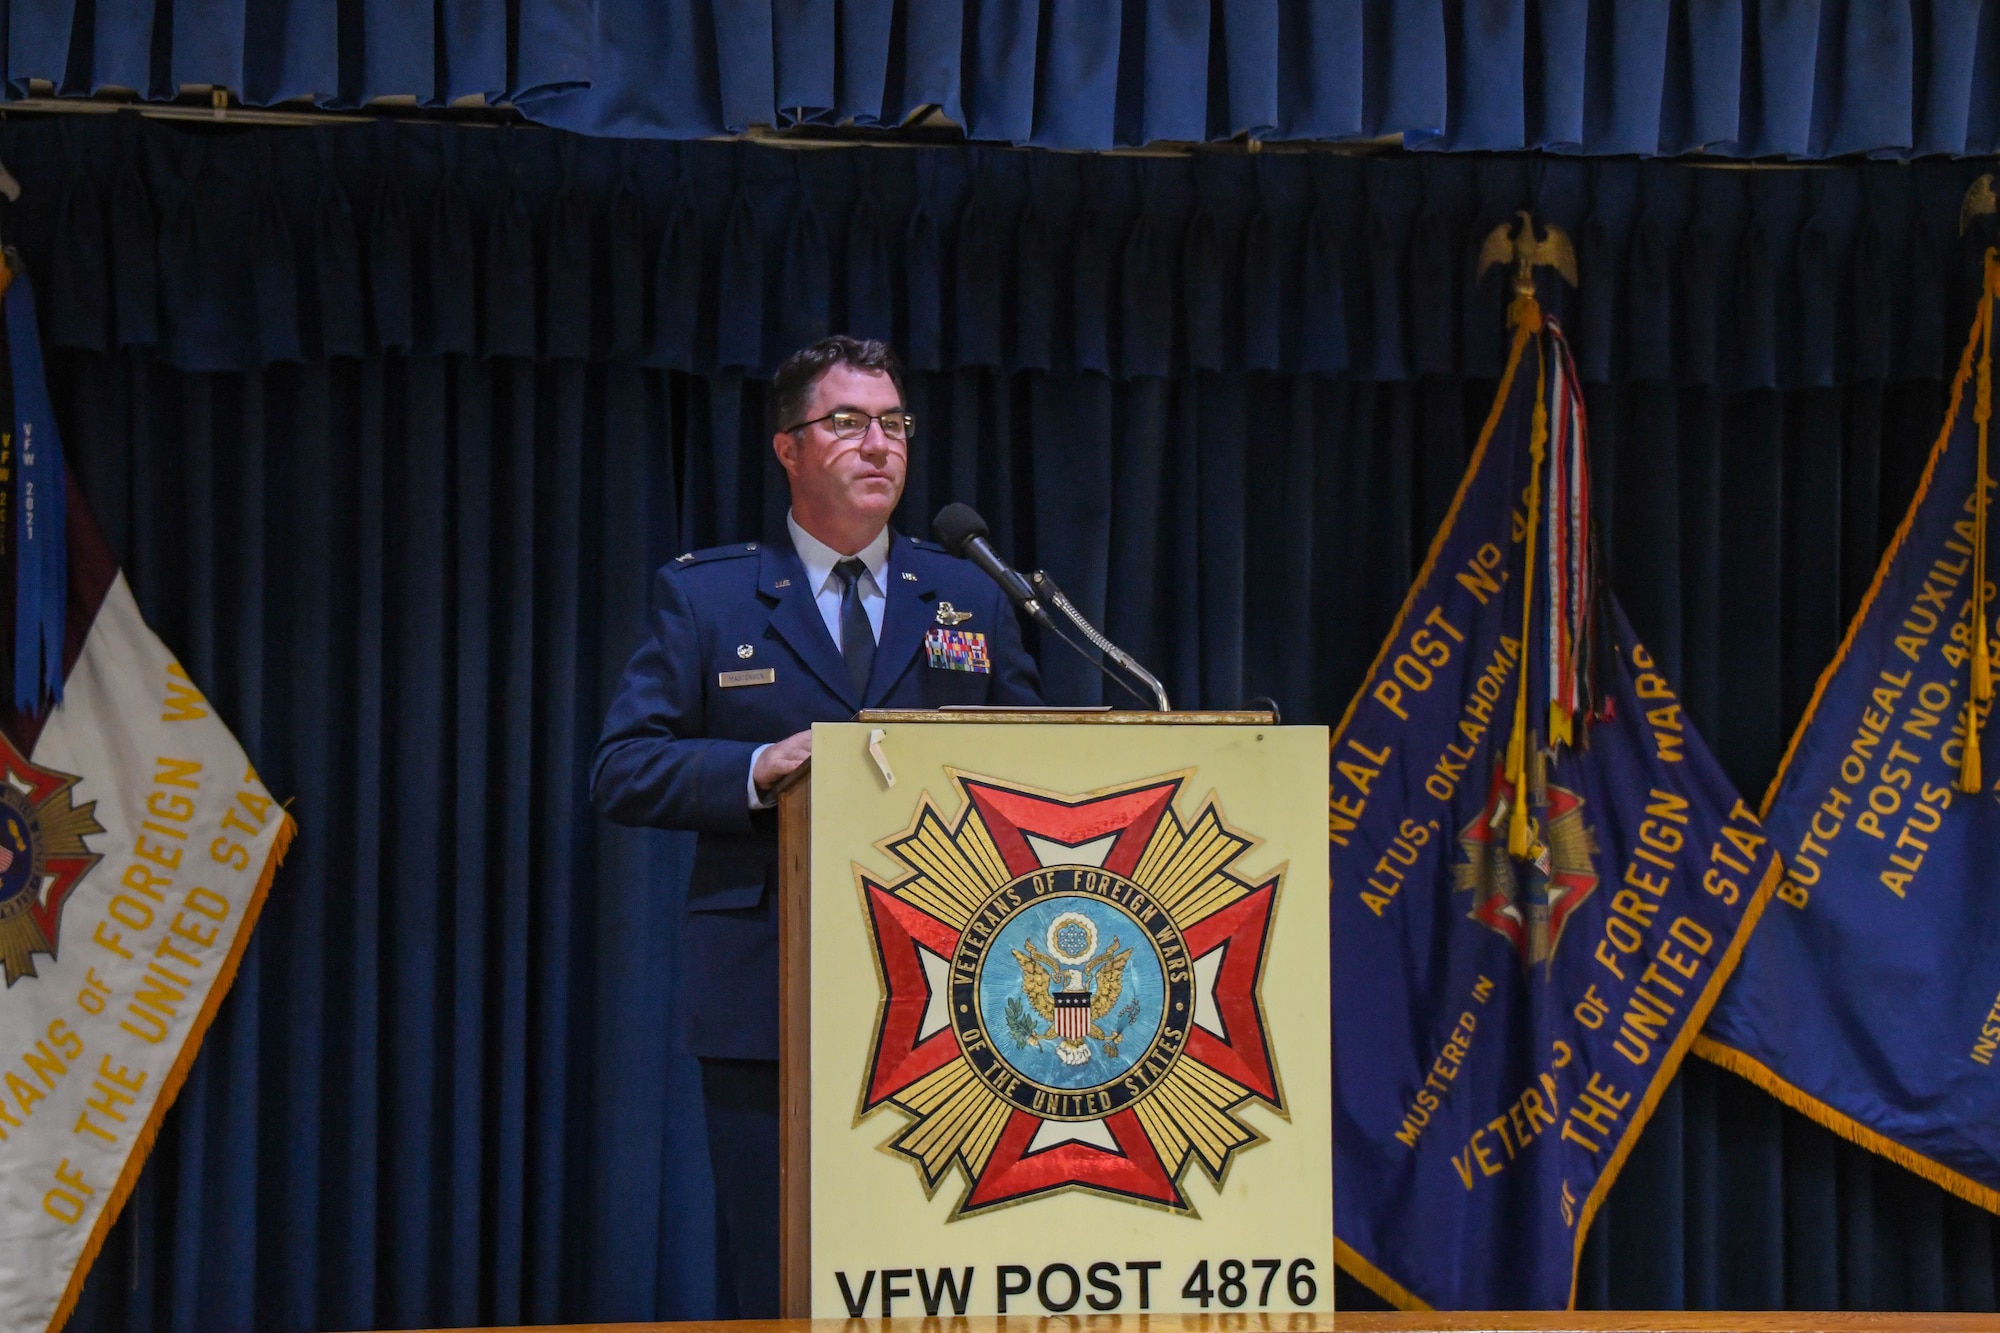 U.S. Air Force Col. John Masterson, 97th Operations Group commander, delivers a speech during a Veterans Day lunch at the VFW Post 4876 in Altus, Oklahoma, Nov. 11, 2023. Masterson spoke about the importance of paying tribute to those who have served. (U.S. Air Force photo by Senior Airman Miyah Gray)